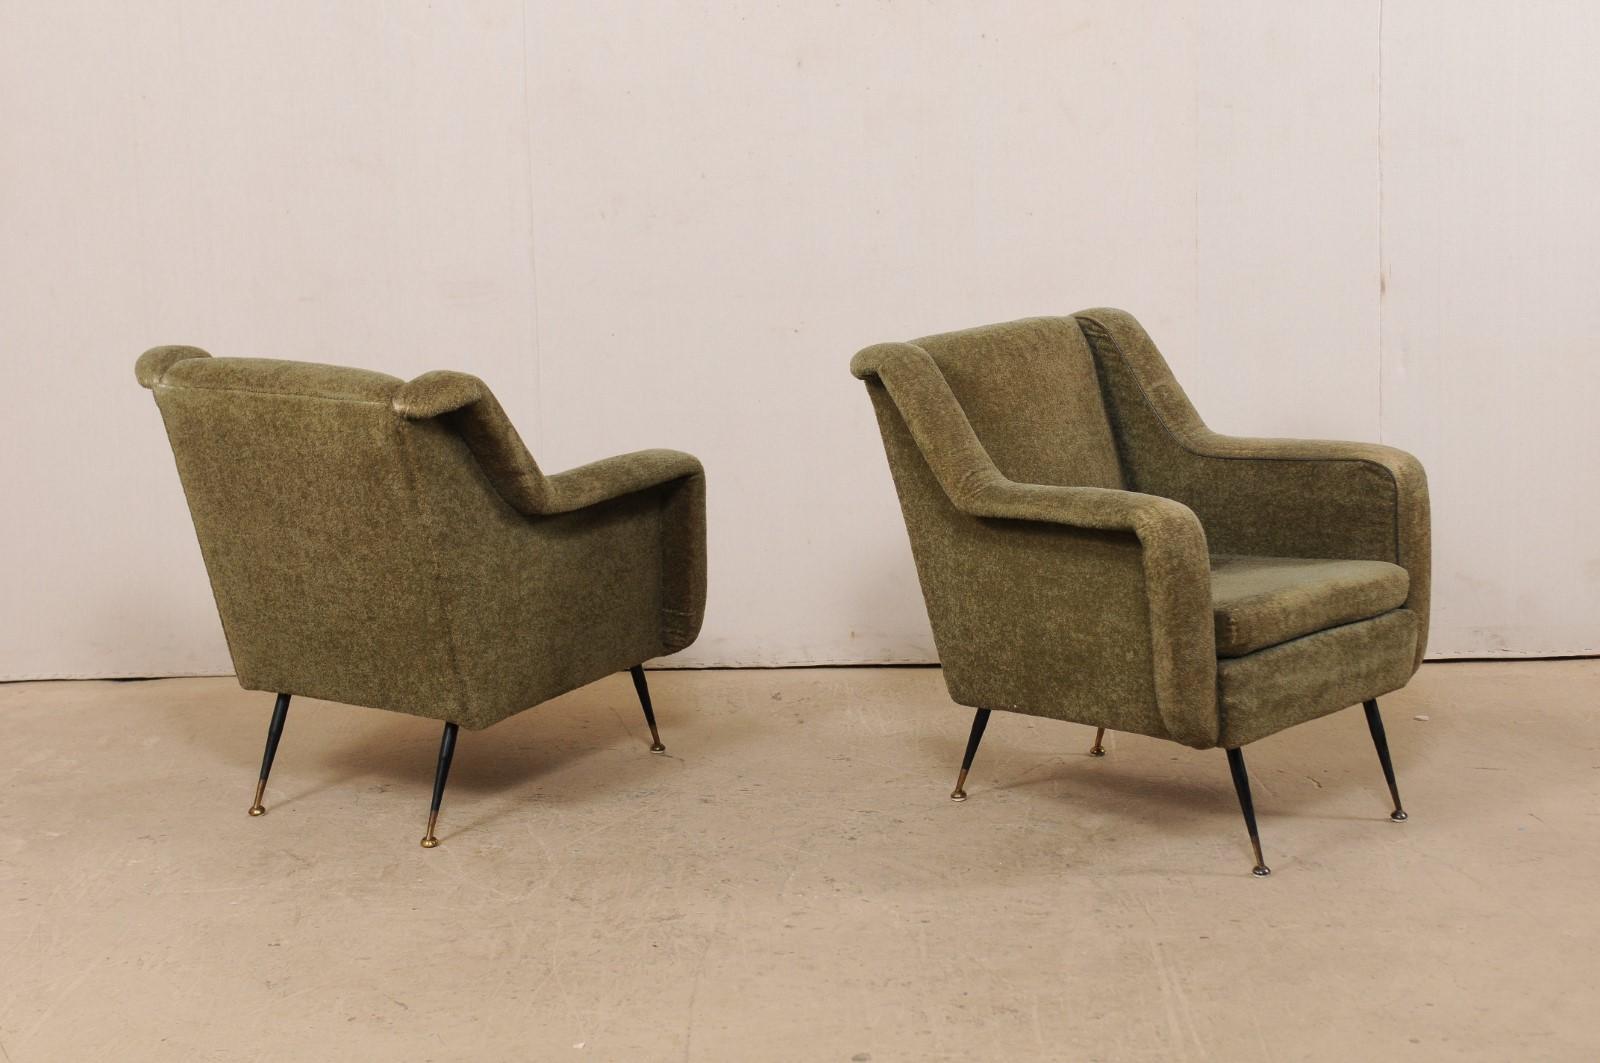 Upholstery Pair of Mid-Century Modern Upholstered Club Chairs from Italy with Iron Legs